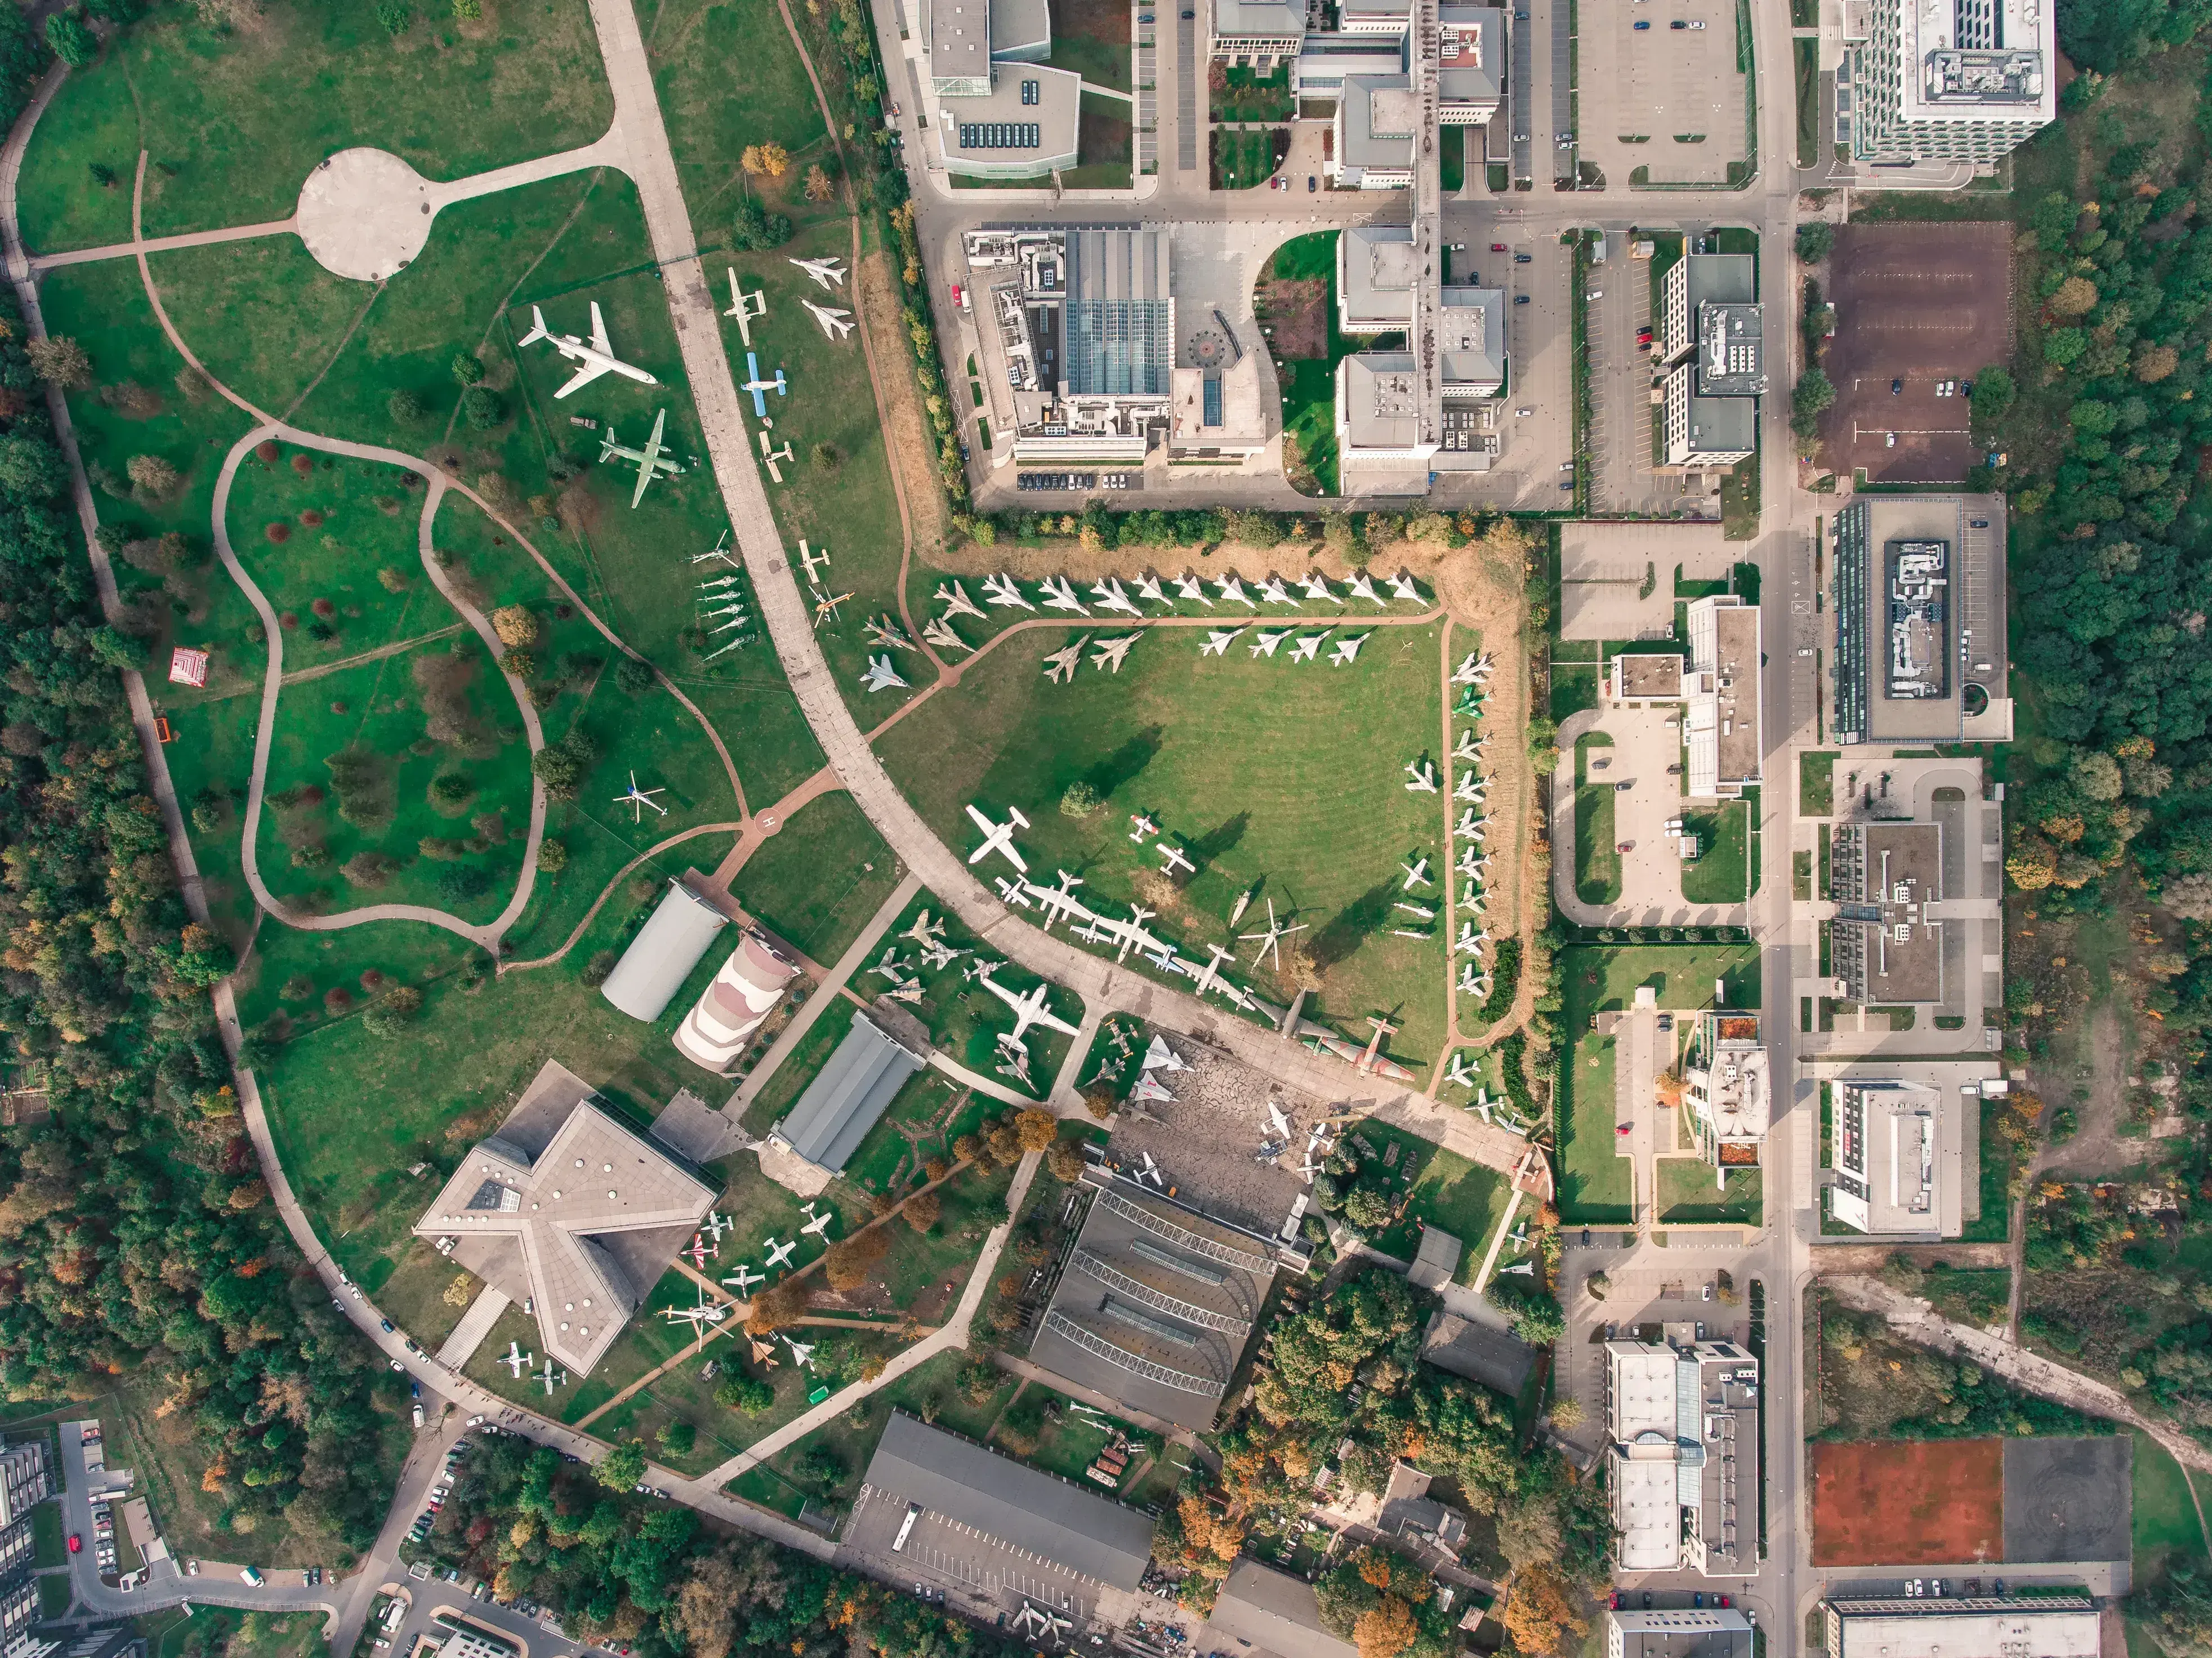 Aerial view of an airport